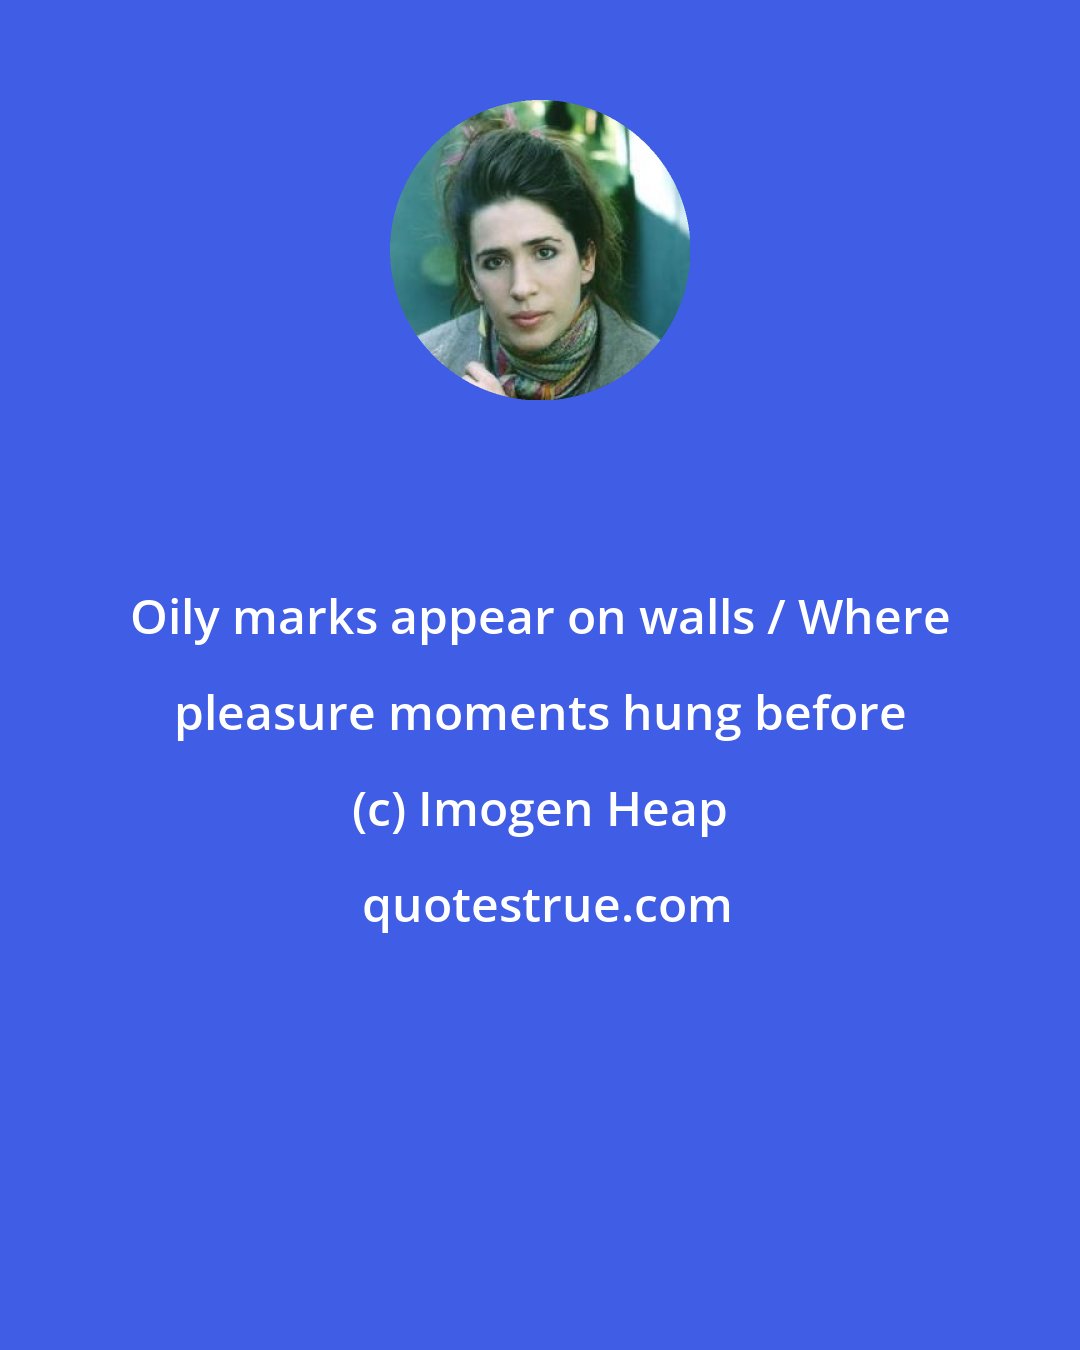 Imogen Heap: Oily marks appear on walls / Where pleasure moments hung before